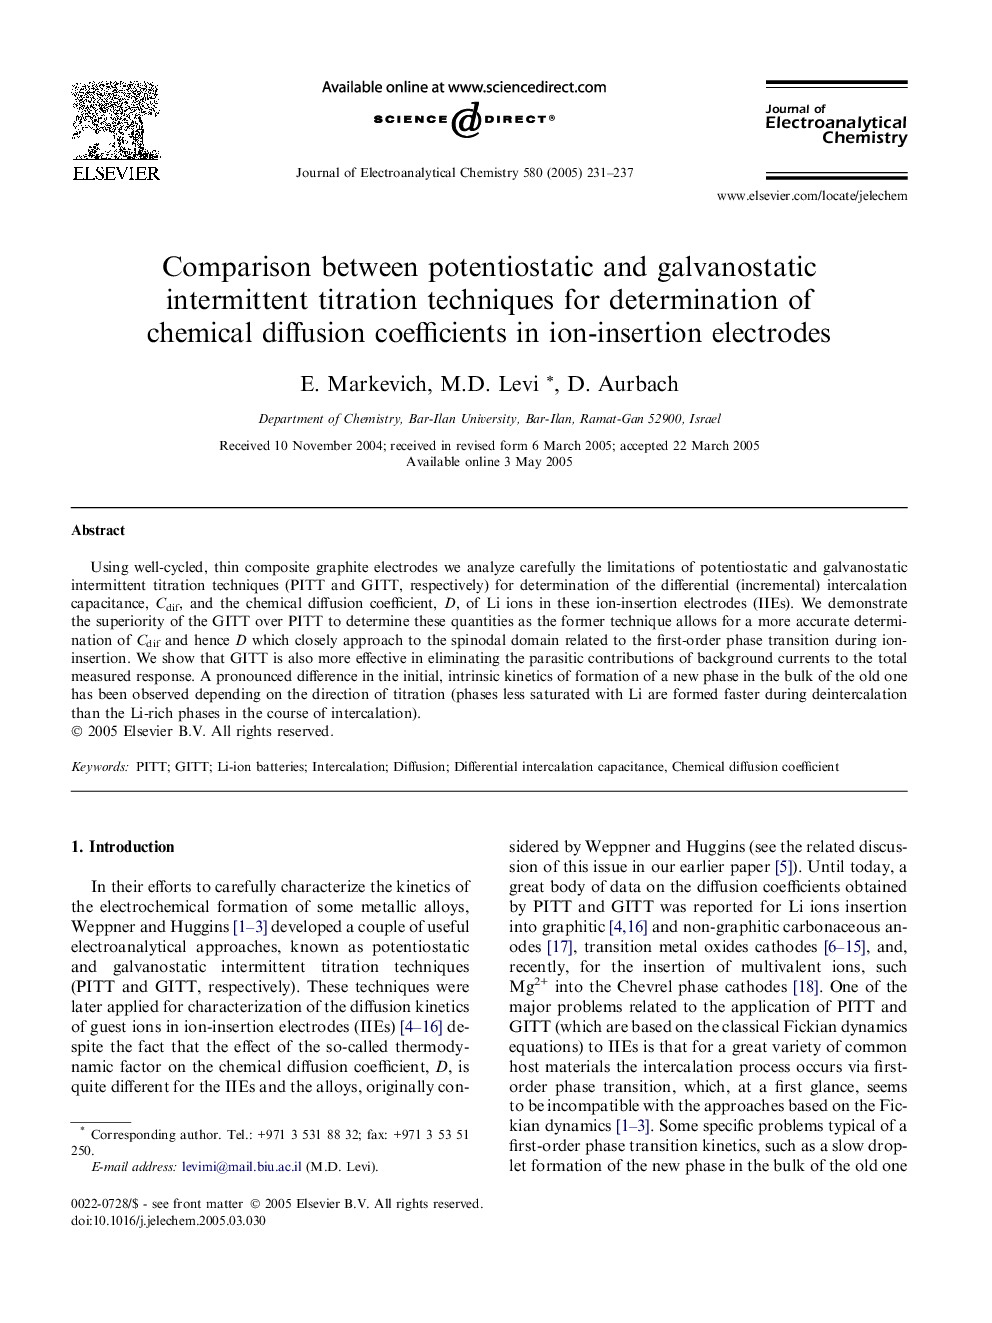 Comparison between potentiostatic and galvanostatic intermittent titration techniques for determination of chemical diffusion coefficients in ion-insertion electrodes